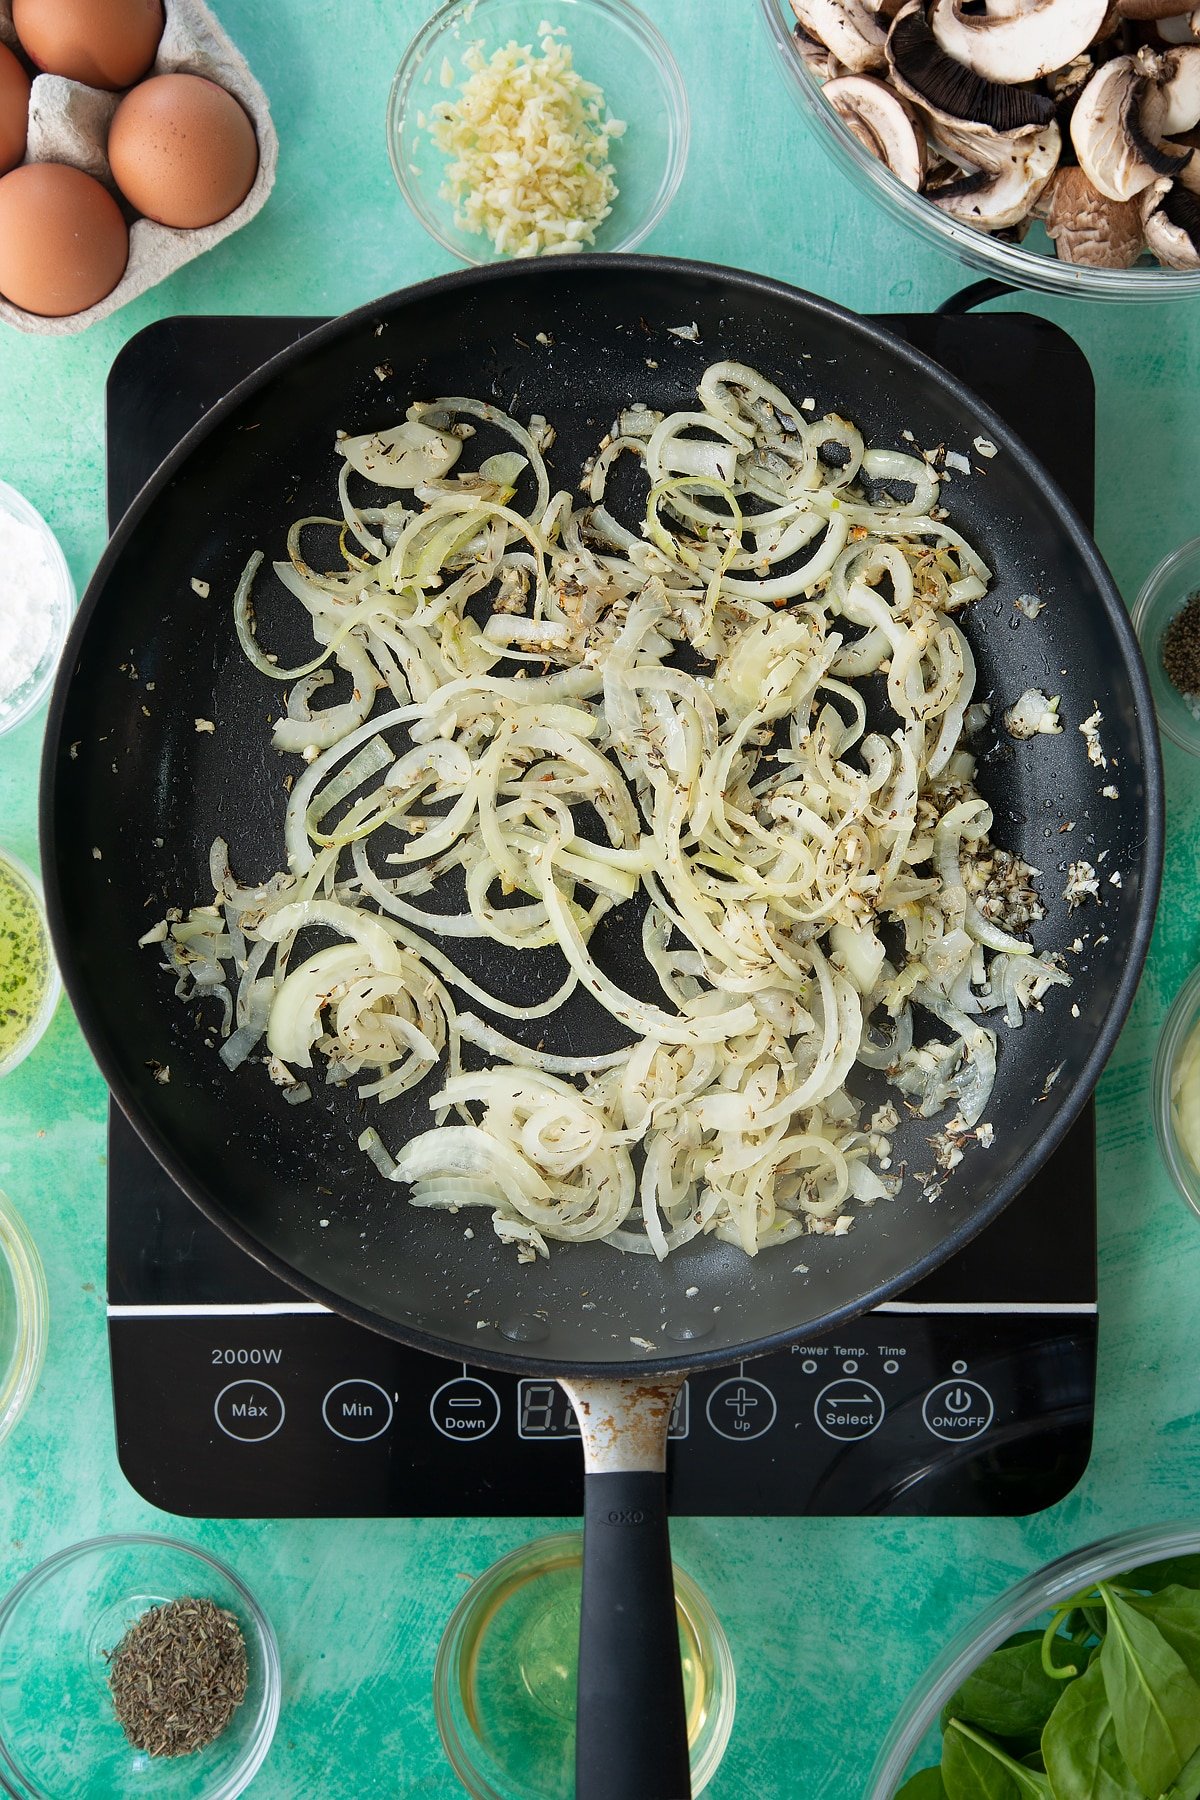 a large black frying pan on an induction hob with minced garlic, herbs and oil topped with cooked onion slices.